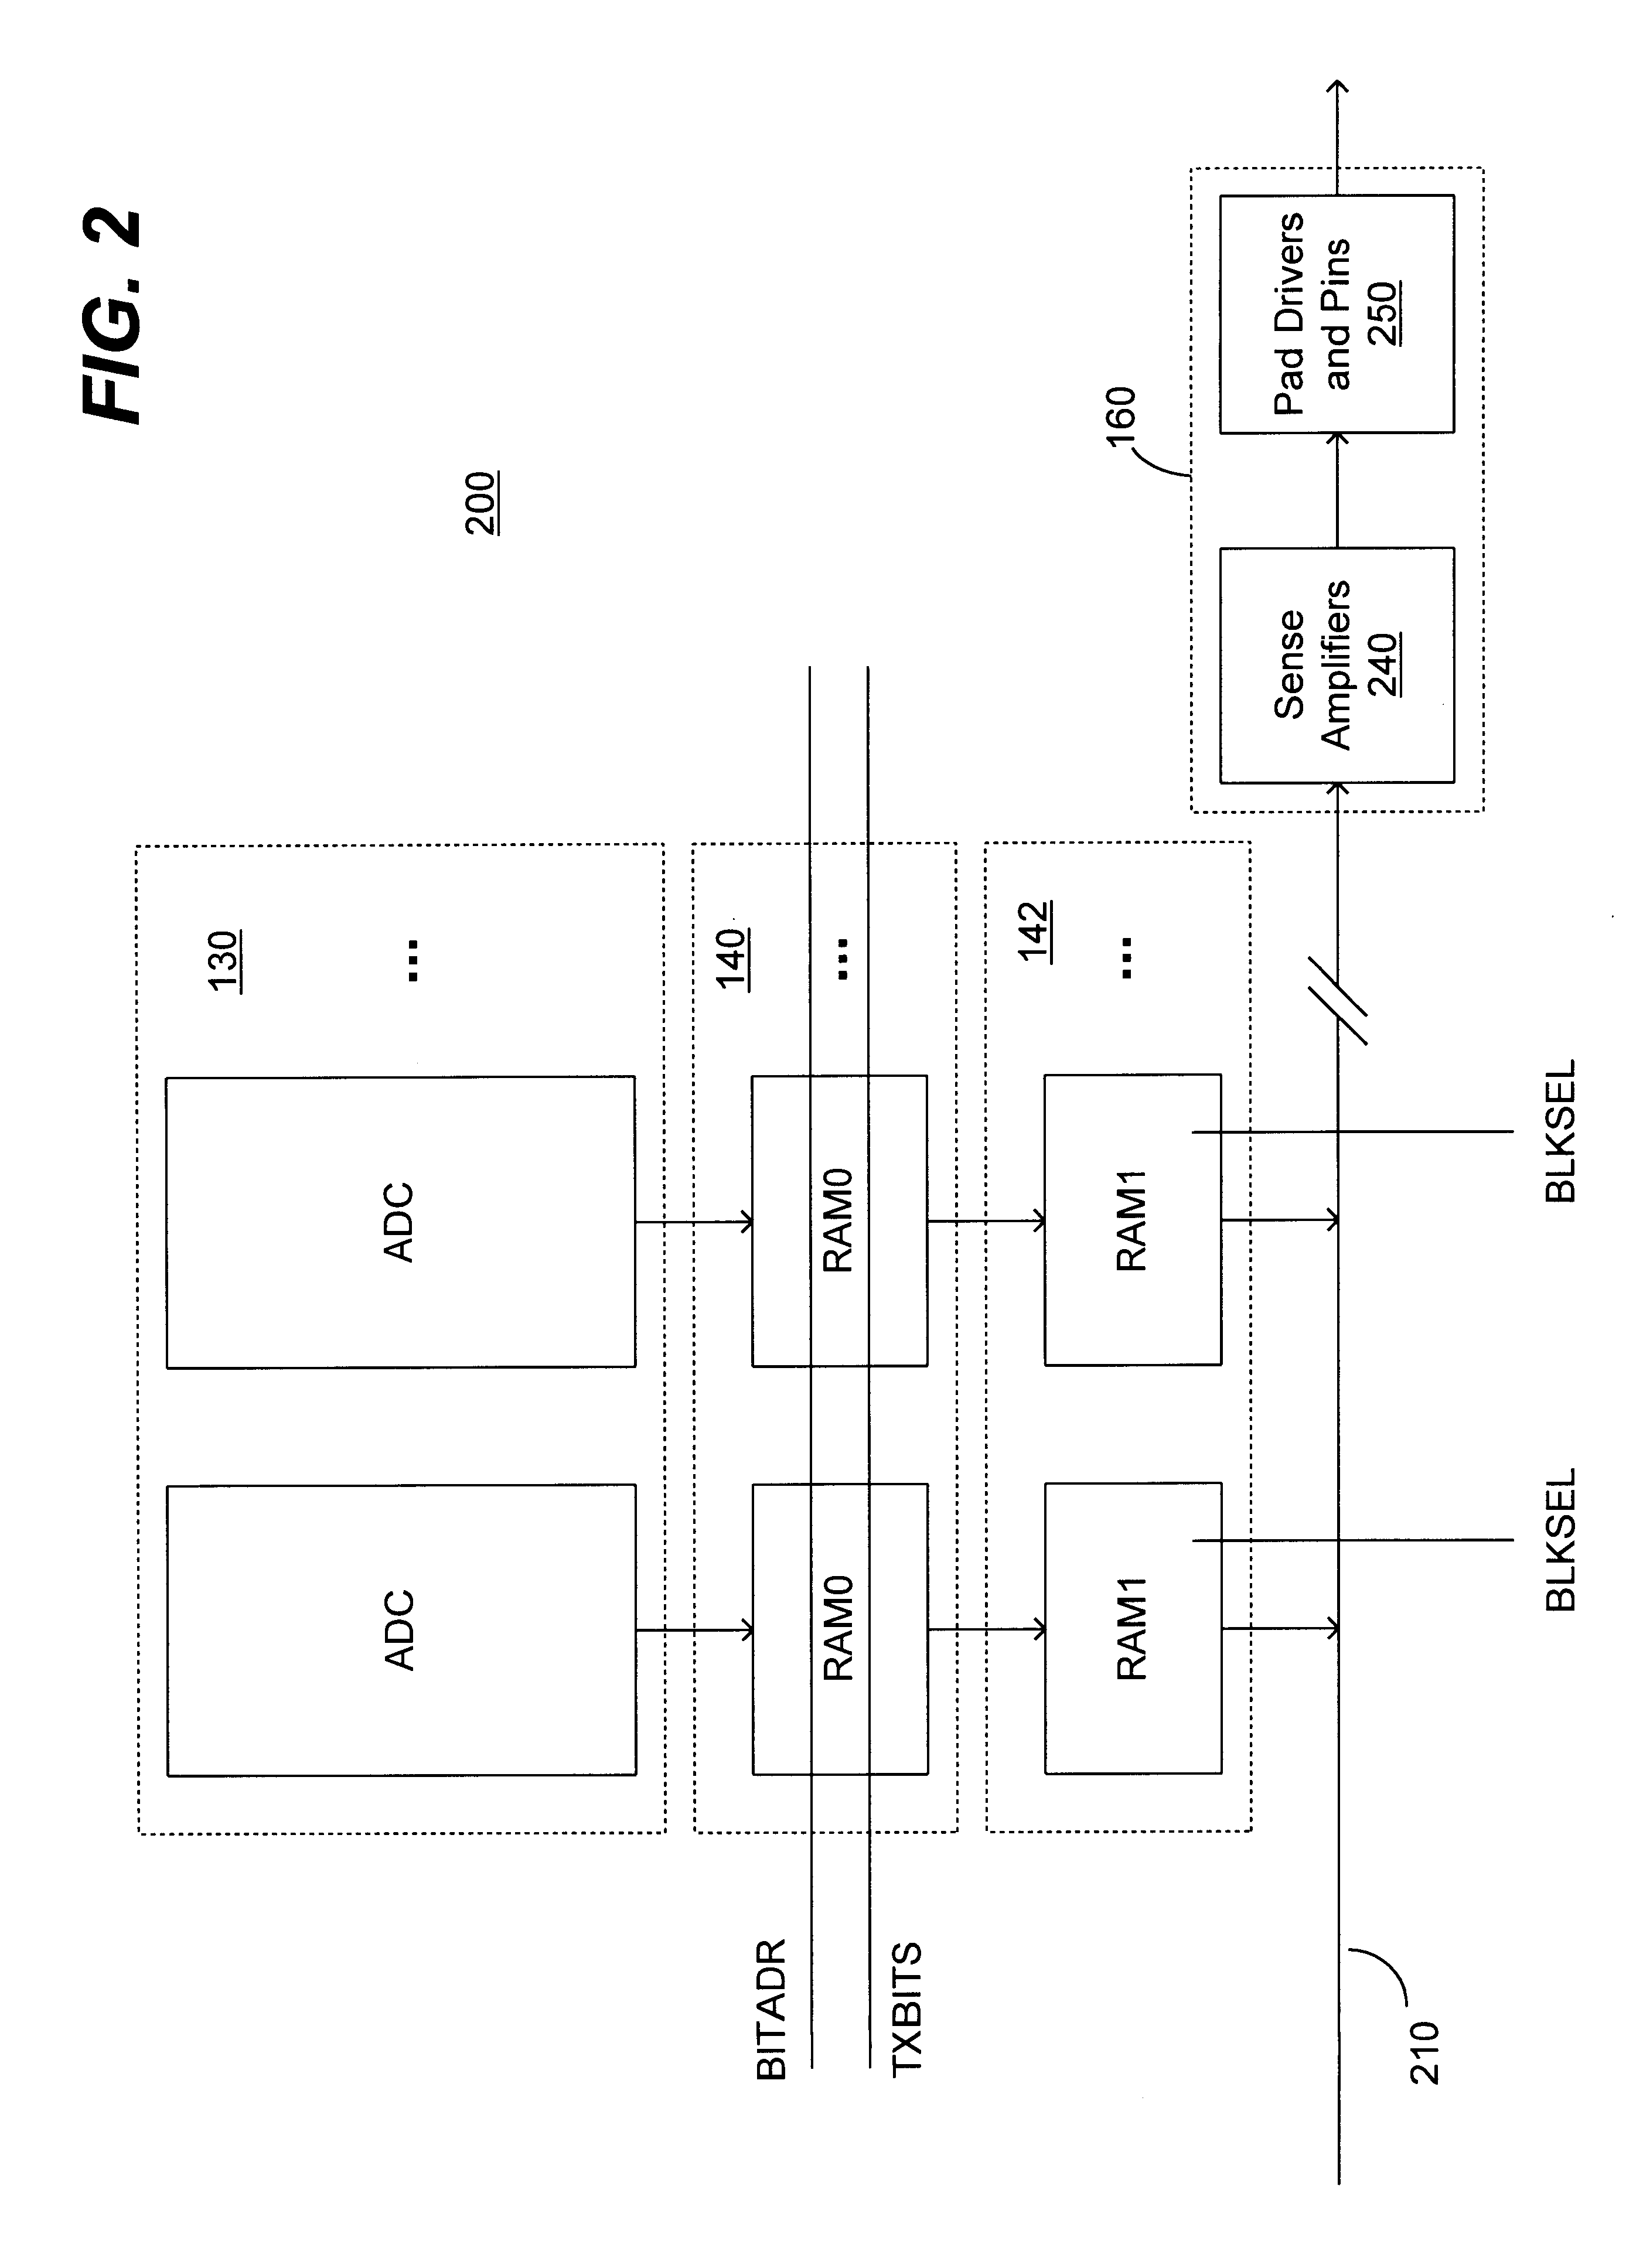 Semiconductor imaging sensor array devices with dual-port digital readout